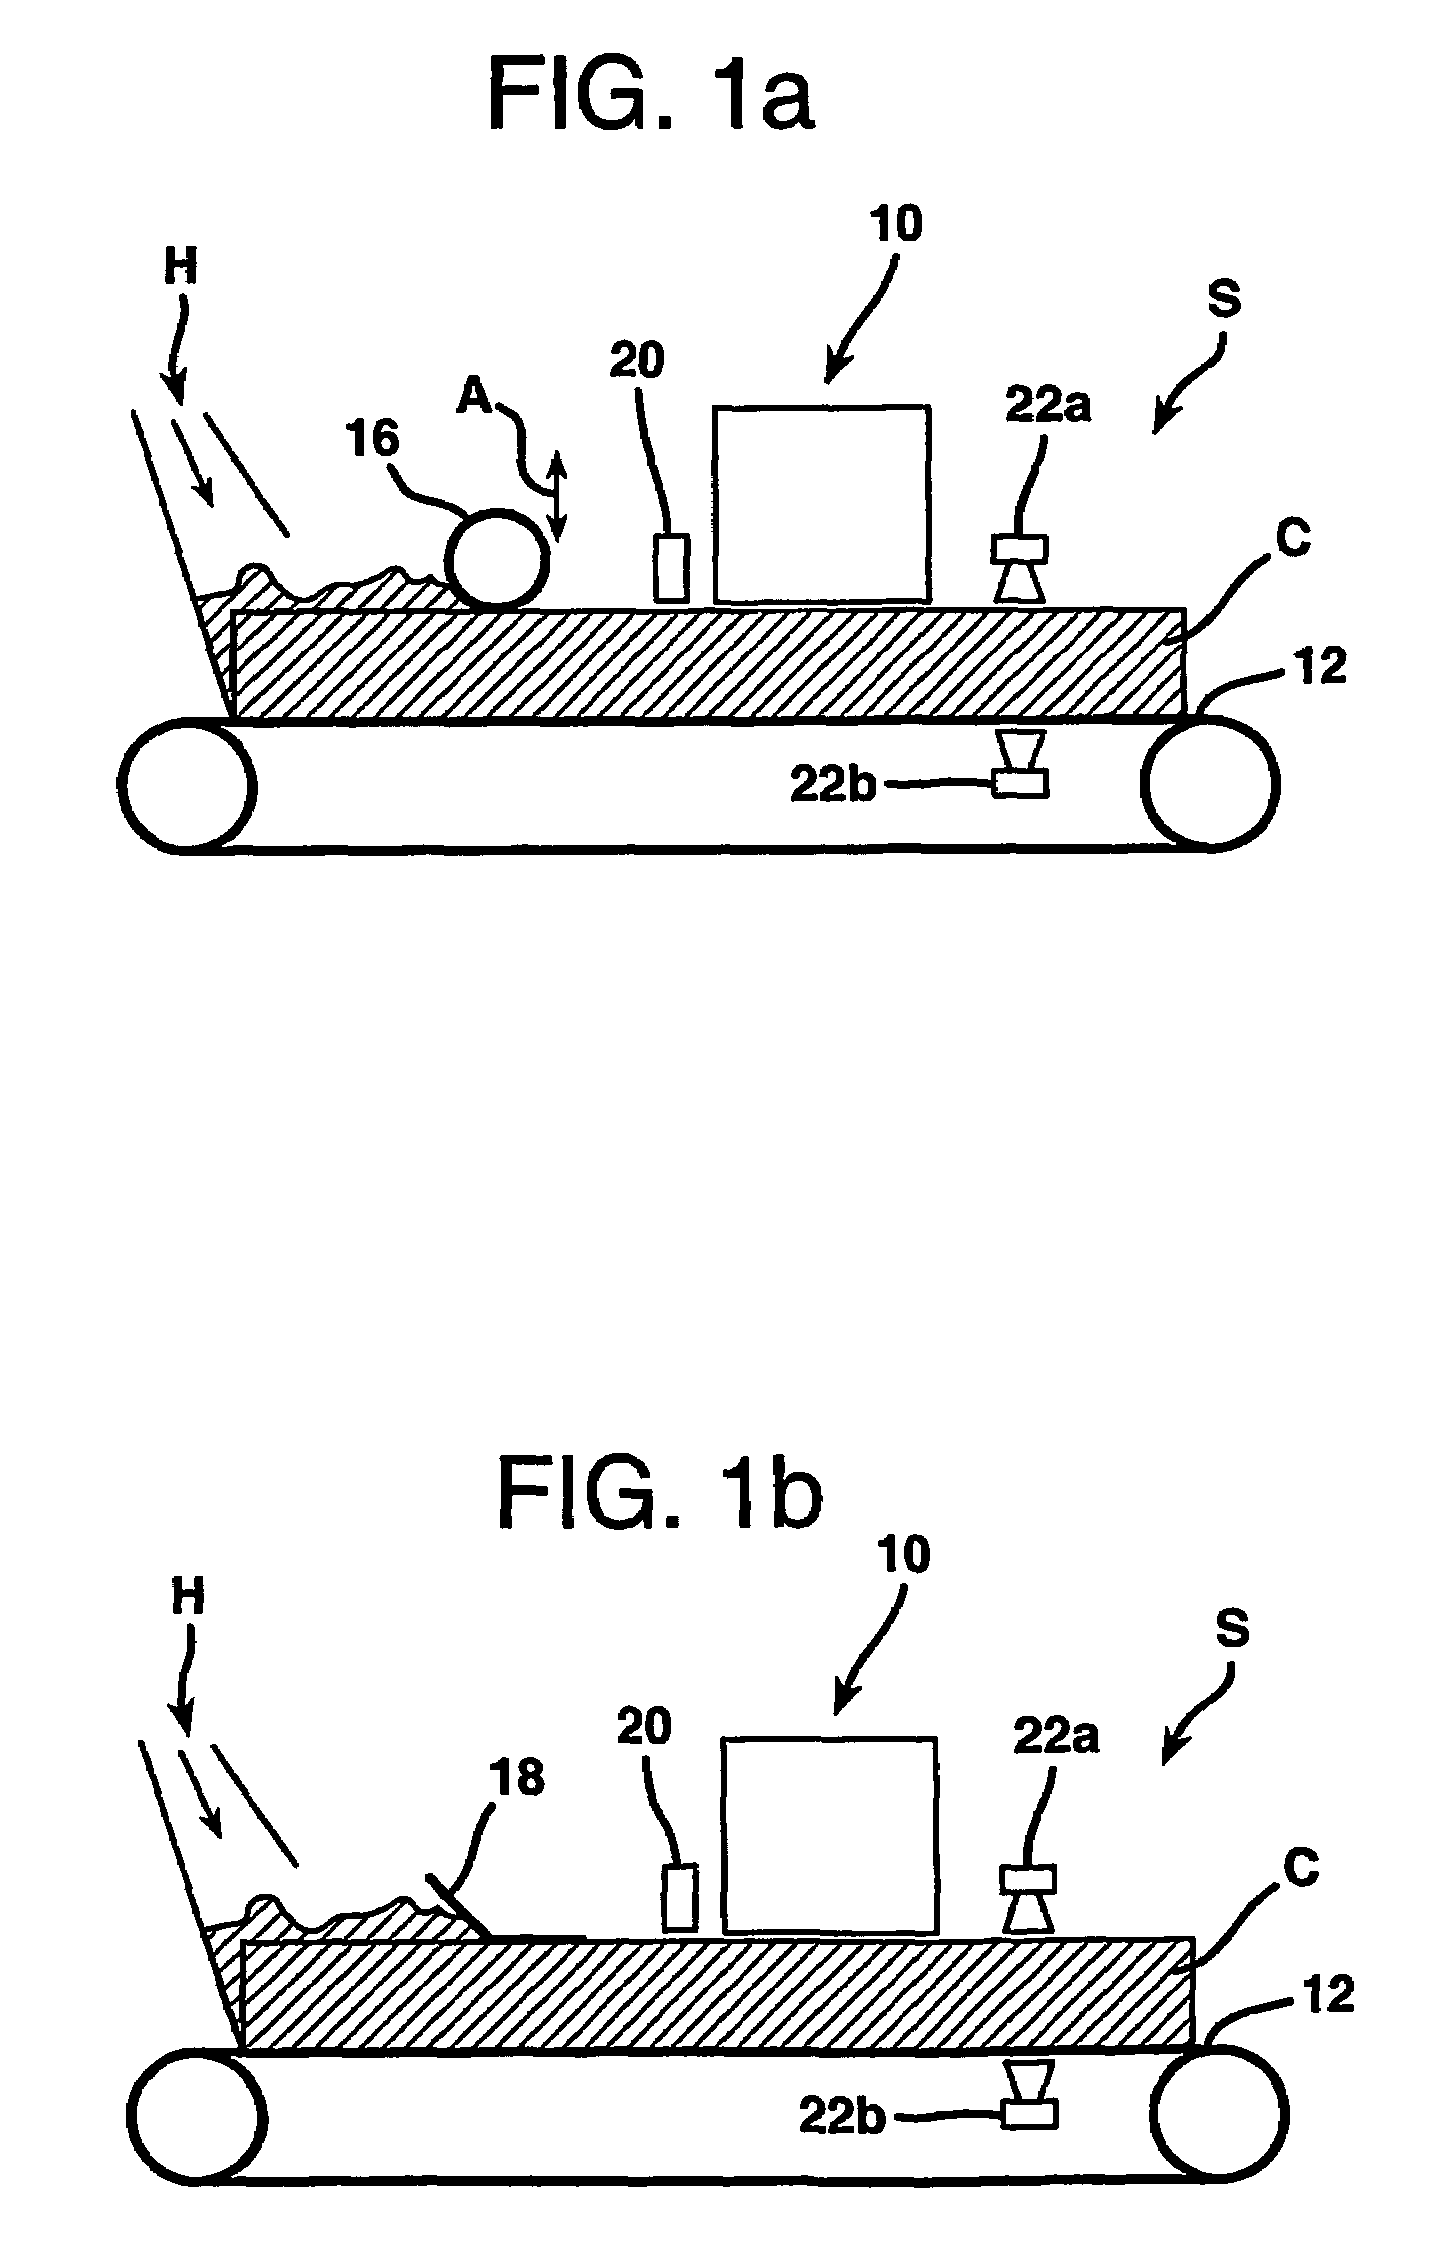 X-ray fluorescence measuring system and methods for trace elements